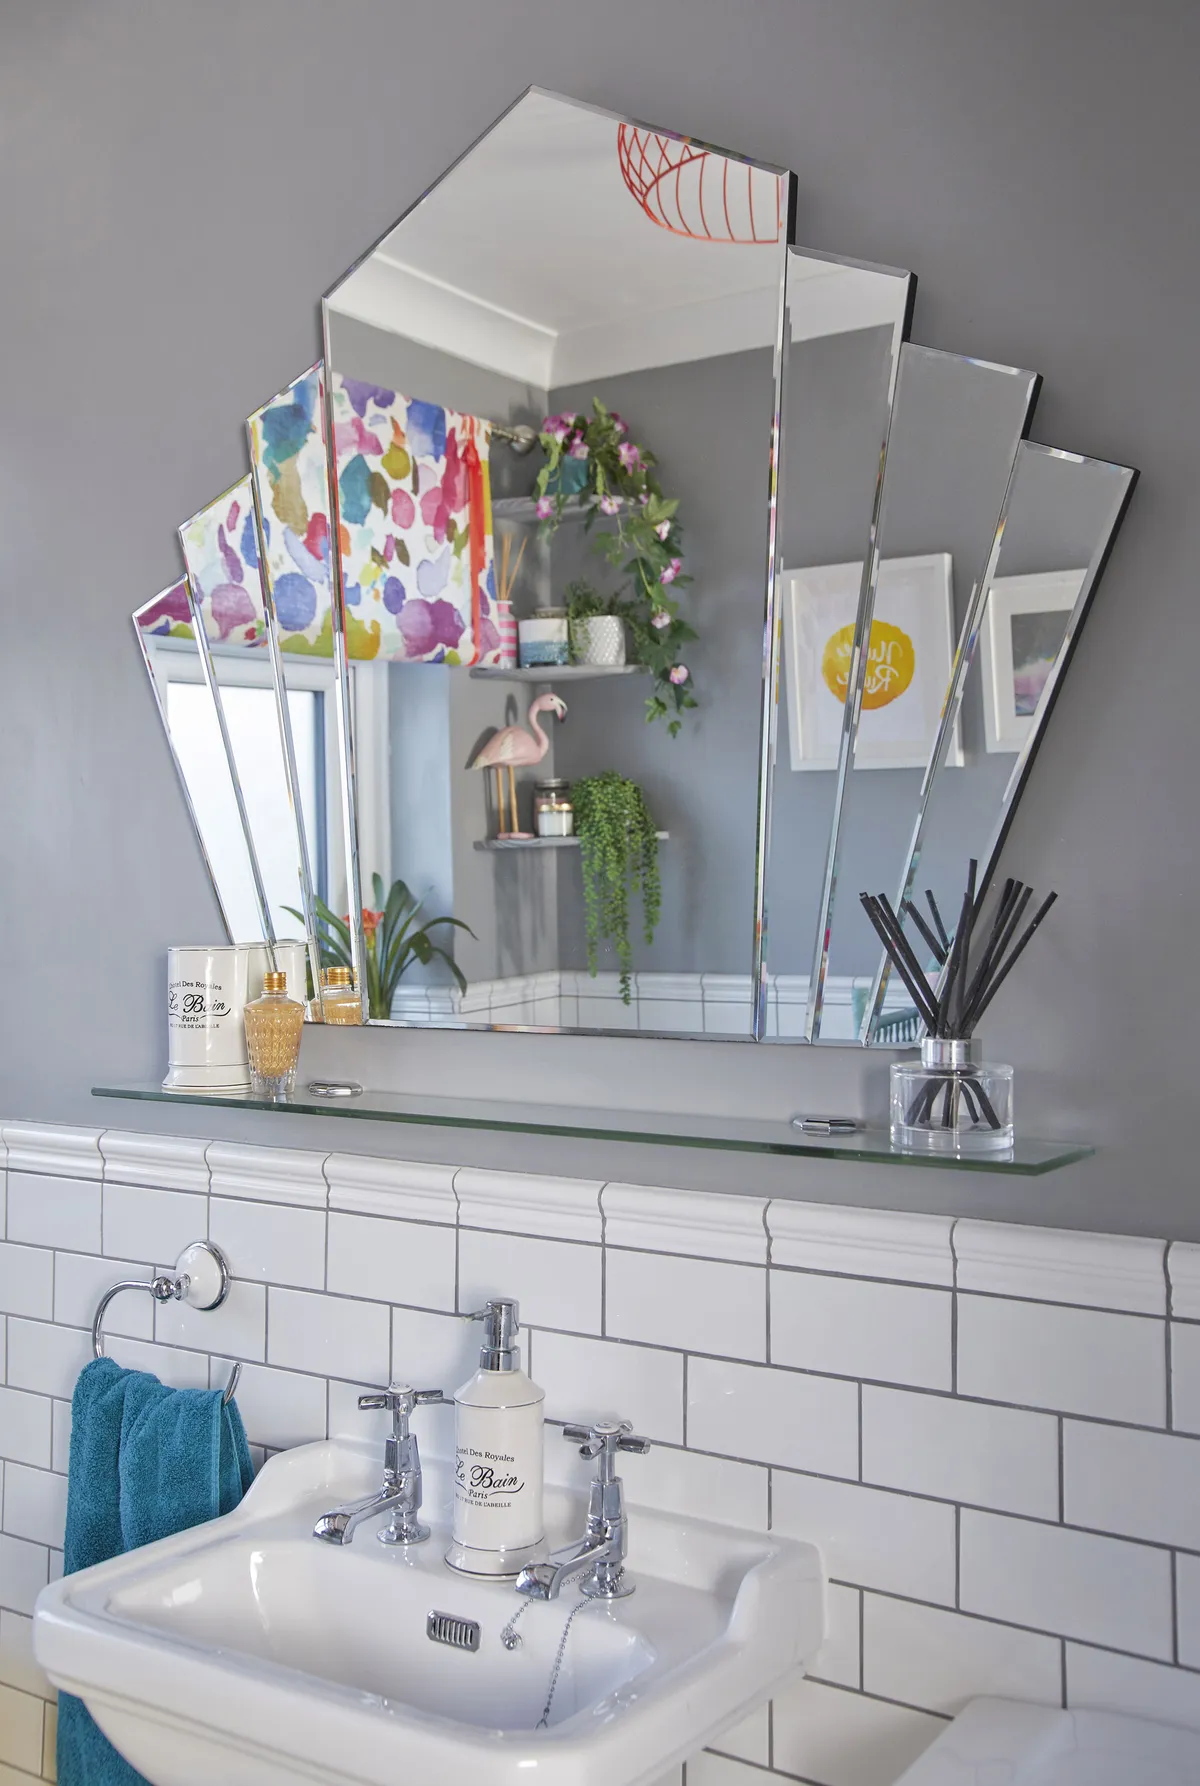 ‘I already had this art deco-style wall mirror from Dunelm, and it’s finally found its pride of place in this room. The glass shelf fits perfectly underneath and is useful as an extra bit of storage’